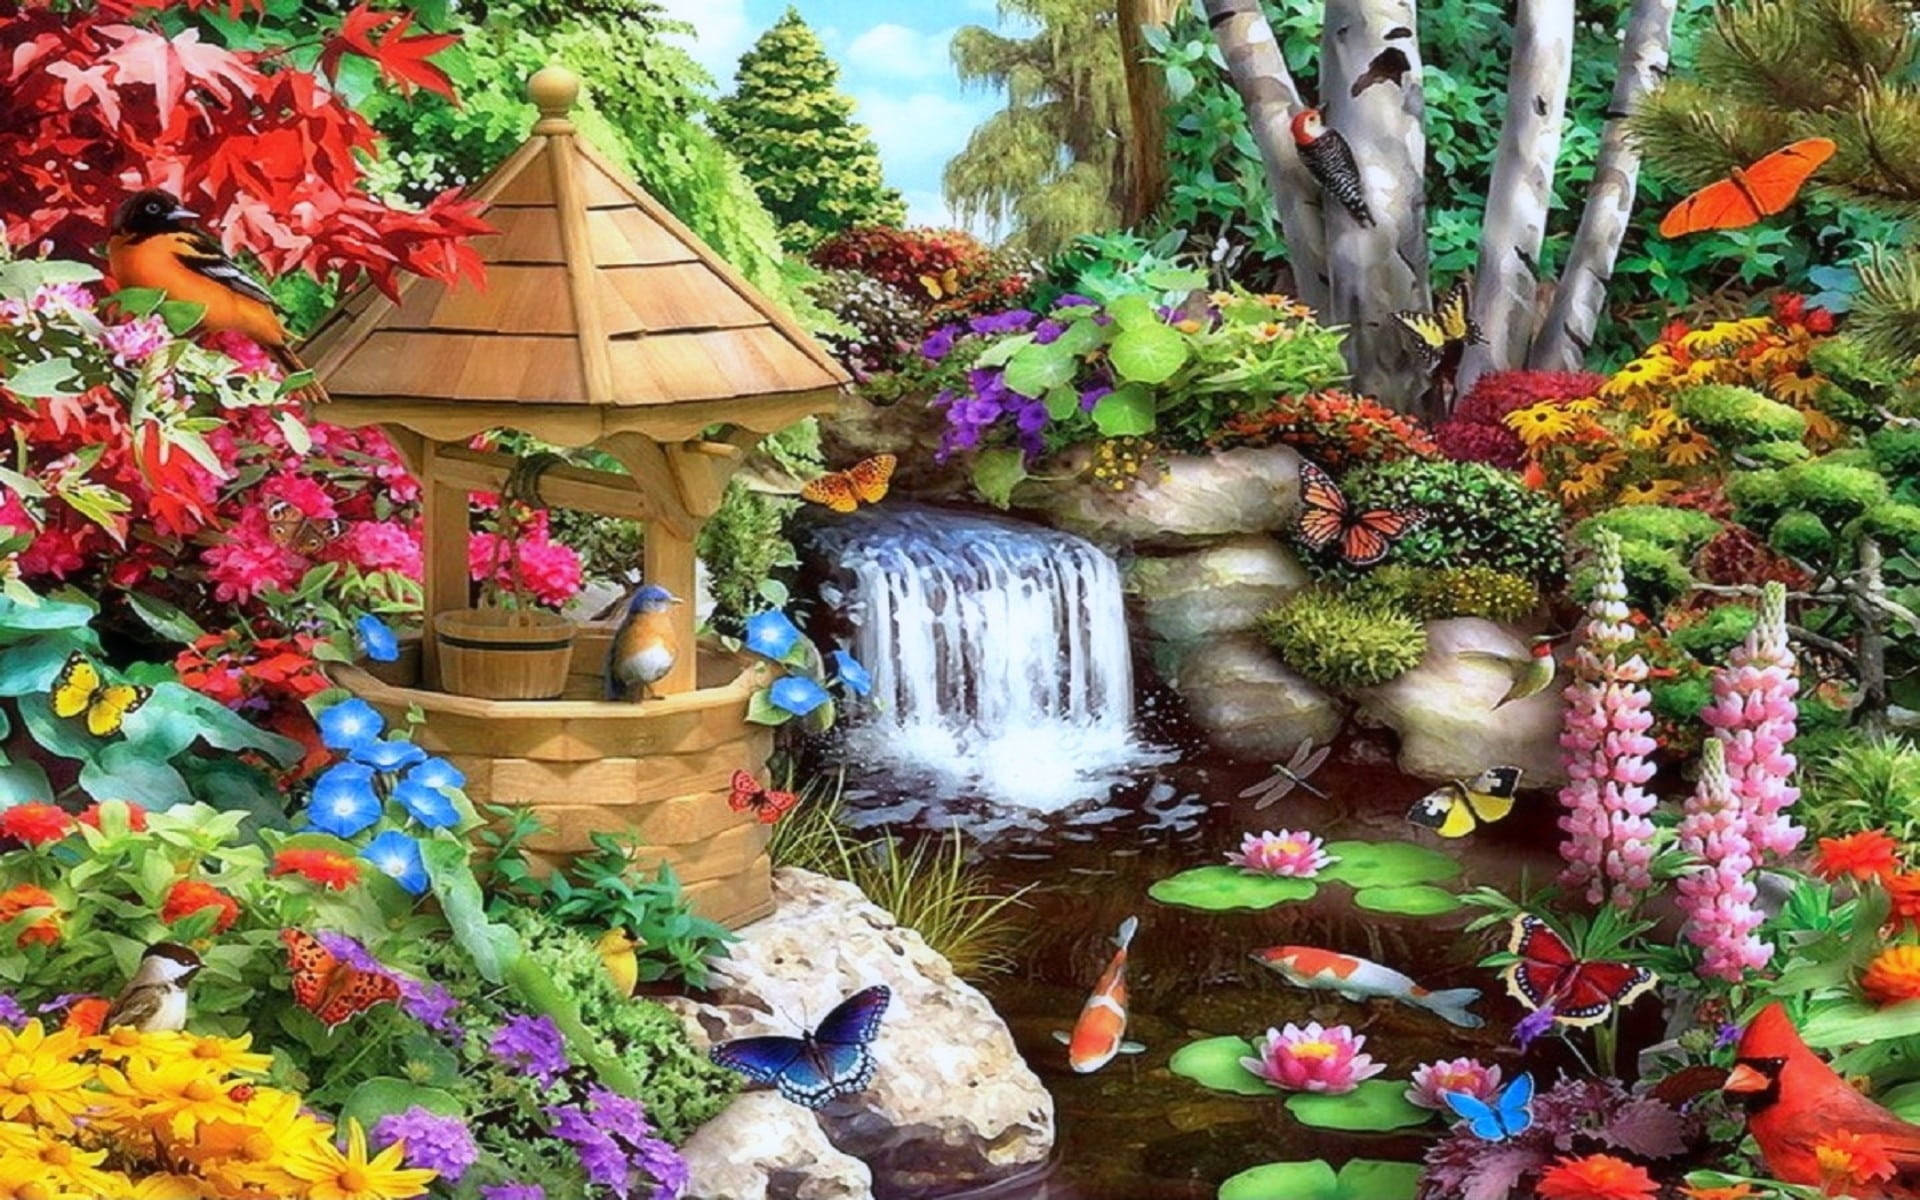 WPFZH Photo wallpaper of classic Chinese style HD waterfall fish pond  beautiful nature landscape 3D Mural living room studio cool 150 * 105cm:  Buy Online at Best Price in UAE - Amazon.ae